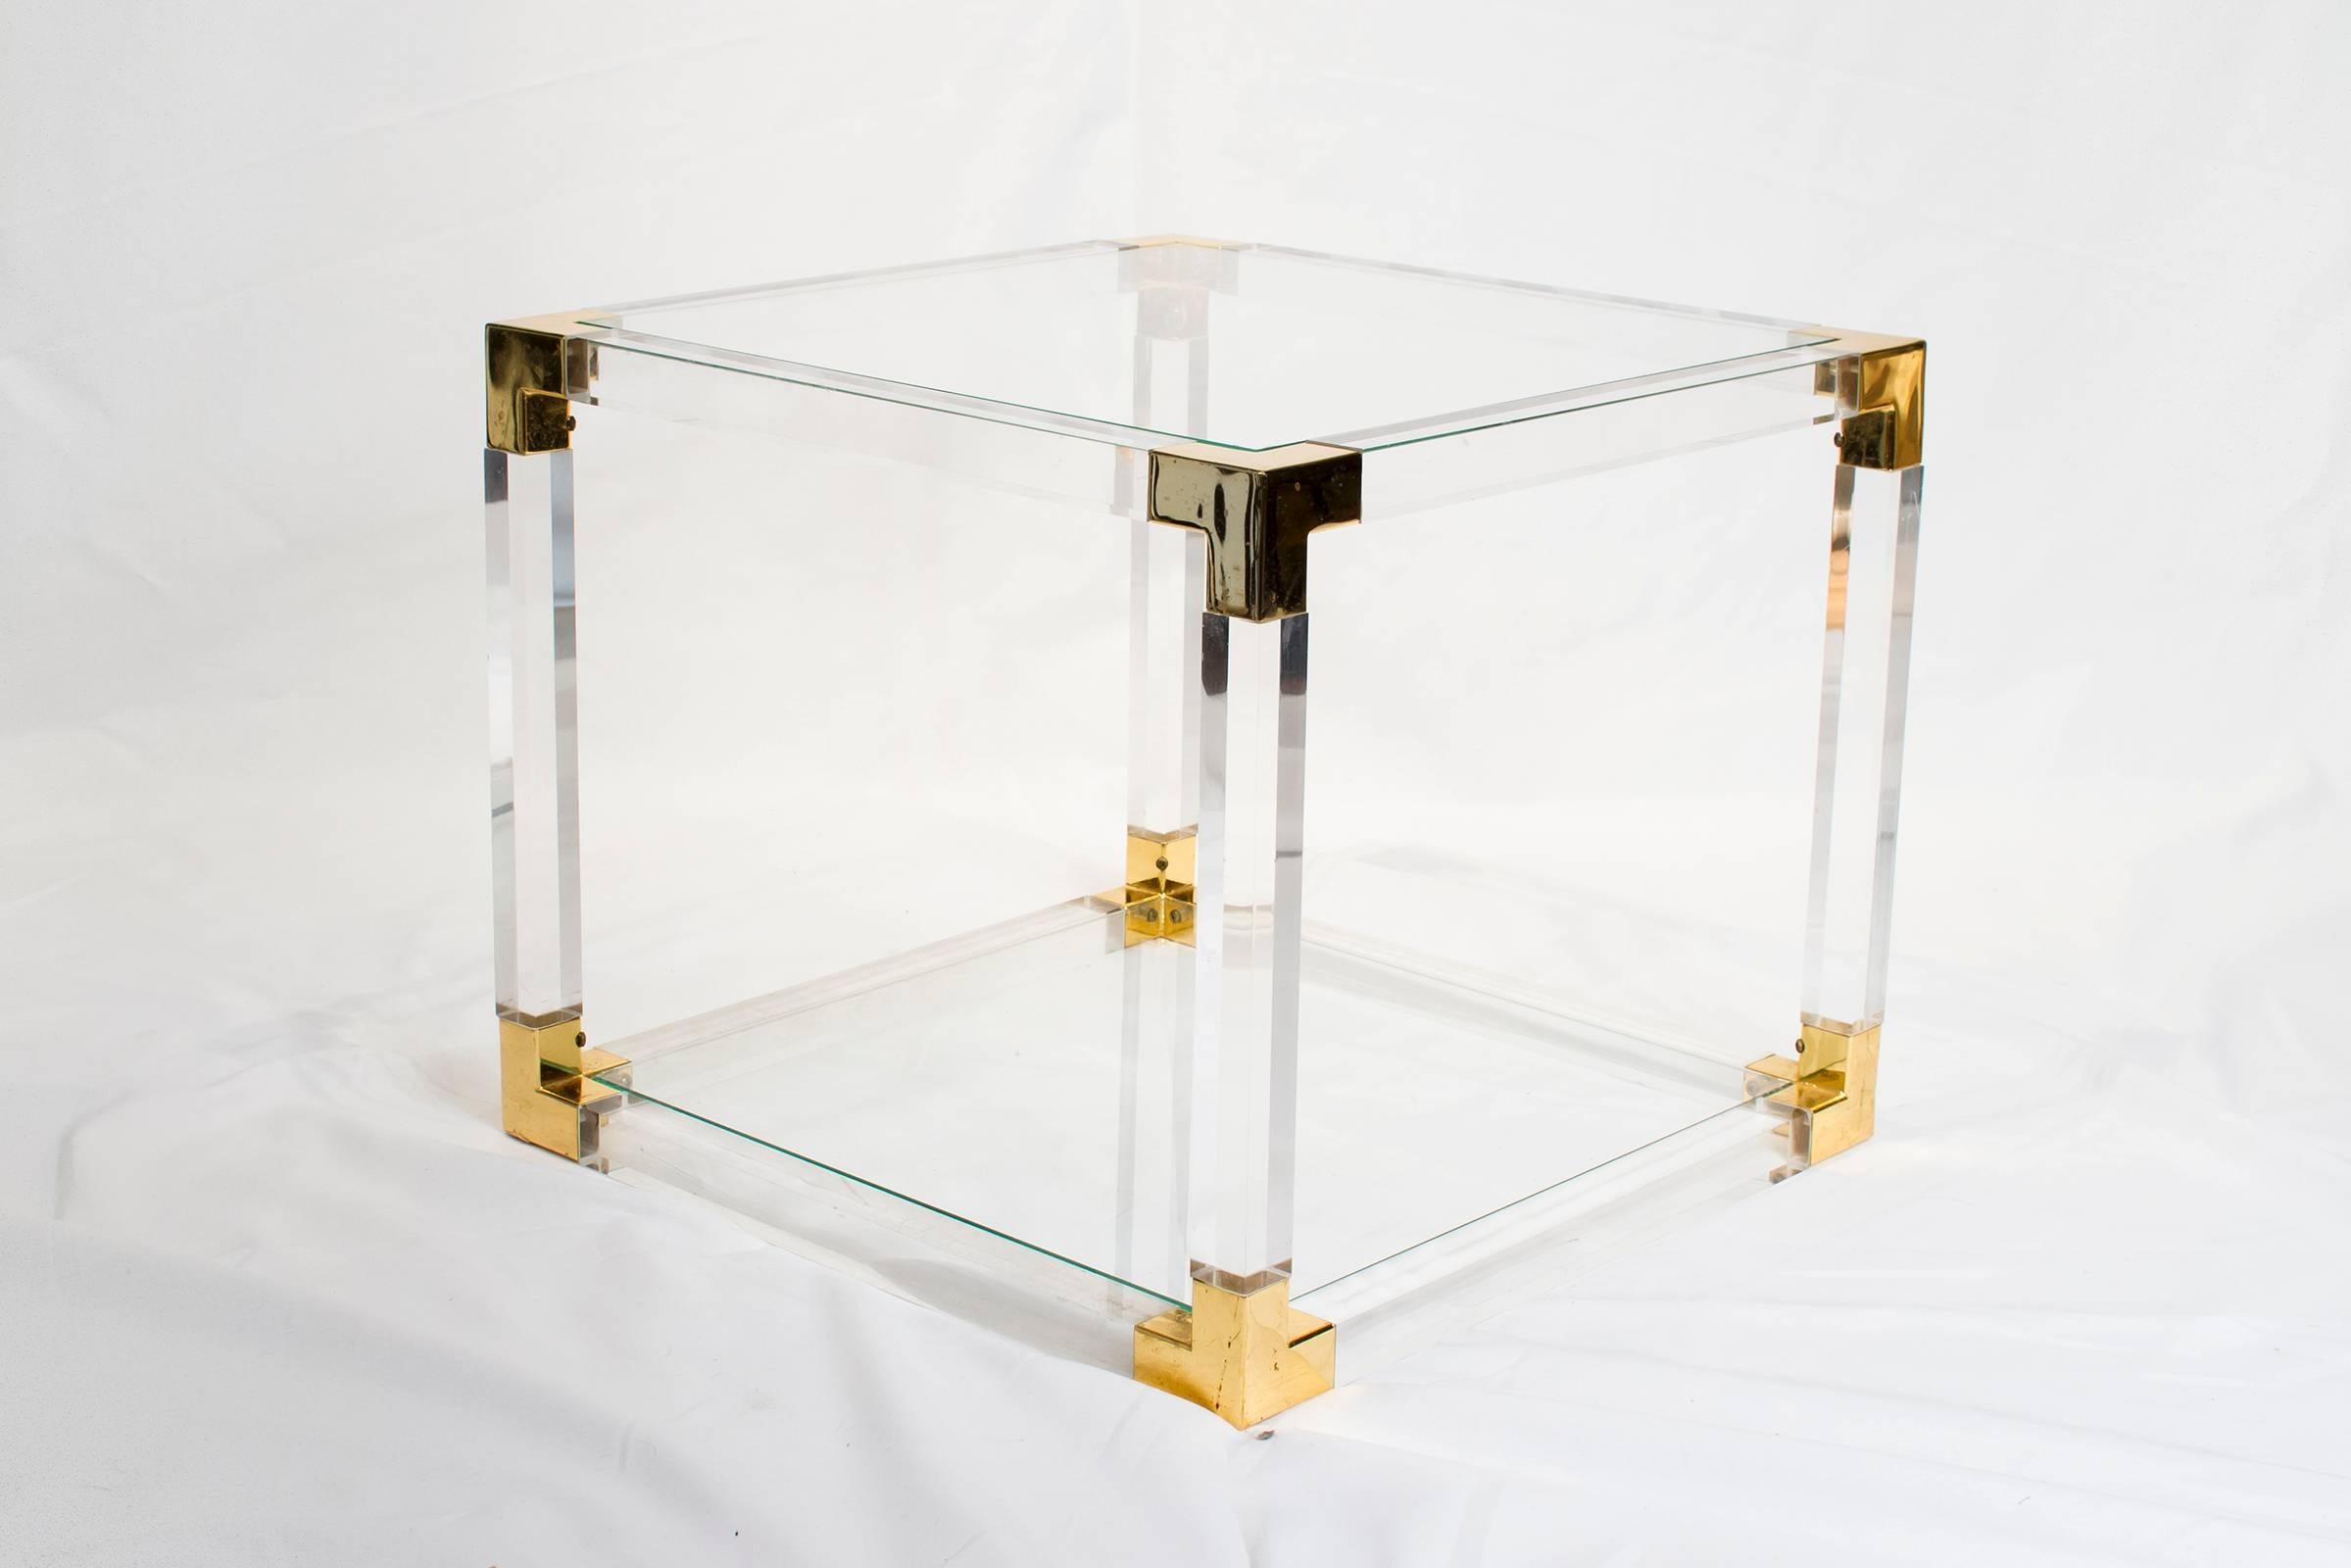 Elegant Lucite and brass side table with glass top in very good condition.

Please look at our storefront page to browse our entire collection.
Please contact us for delivery details.